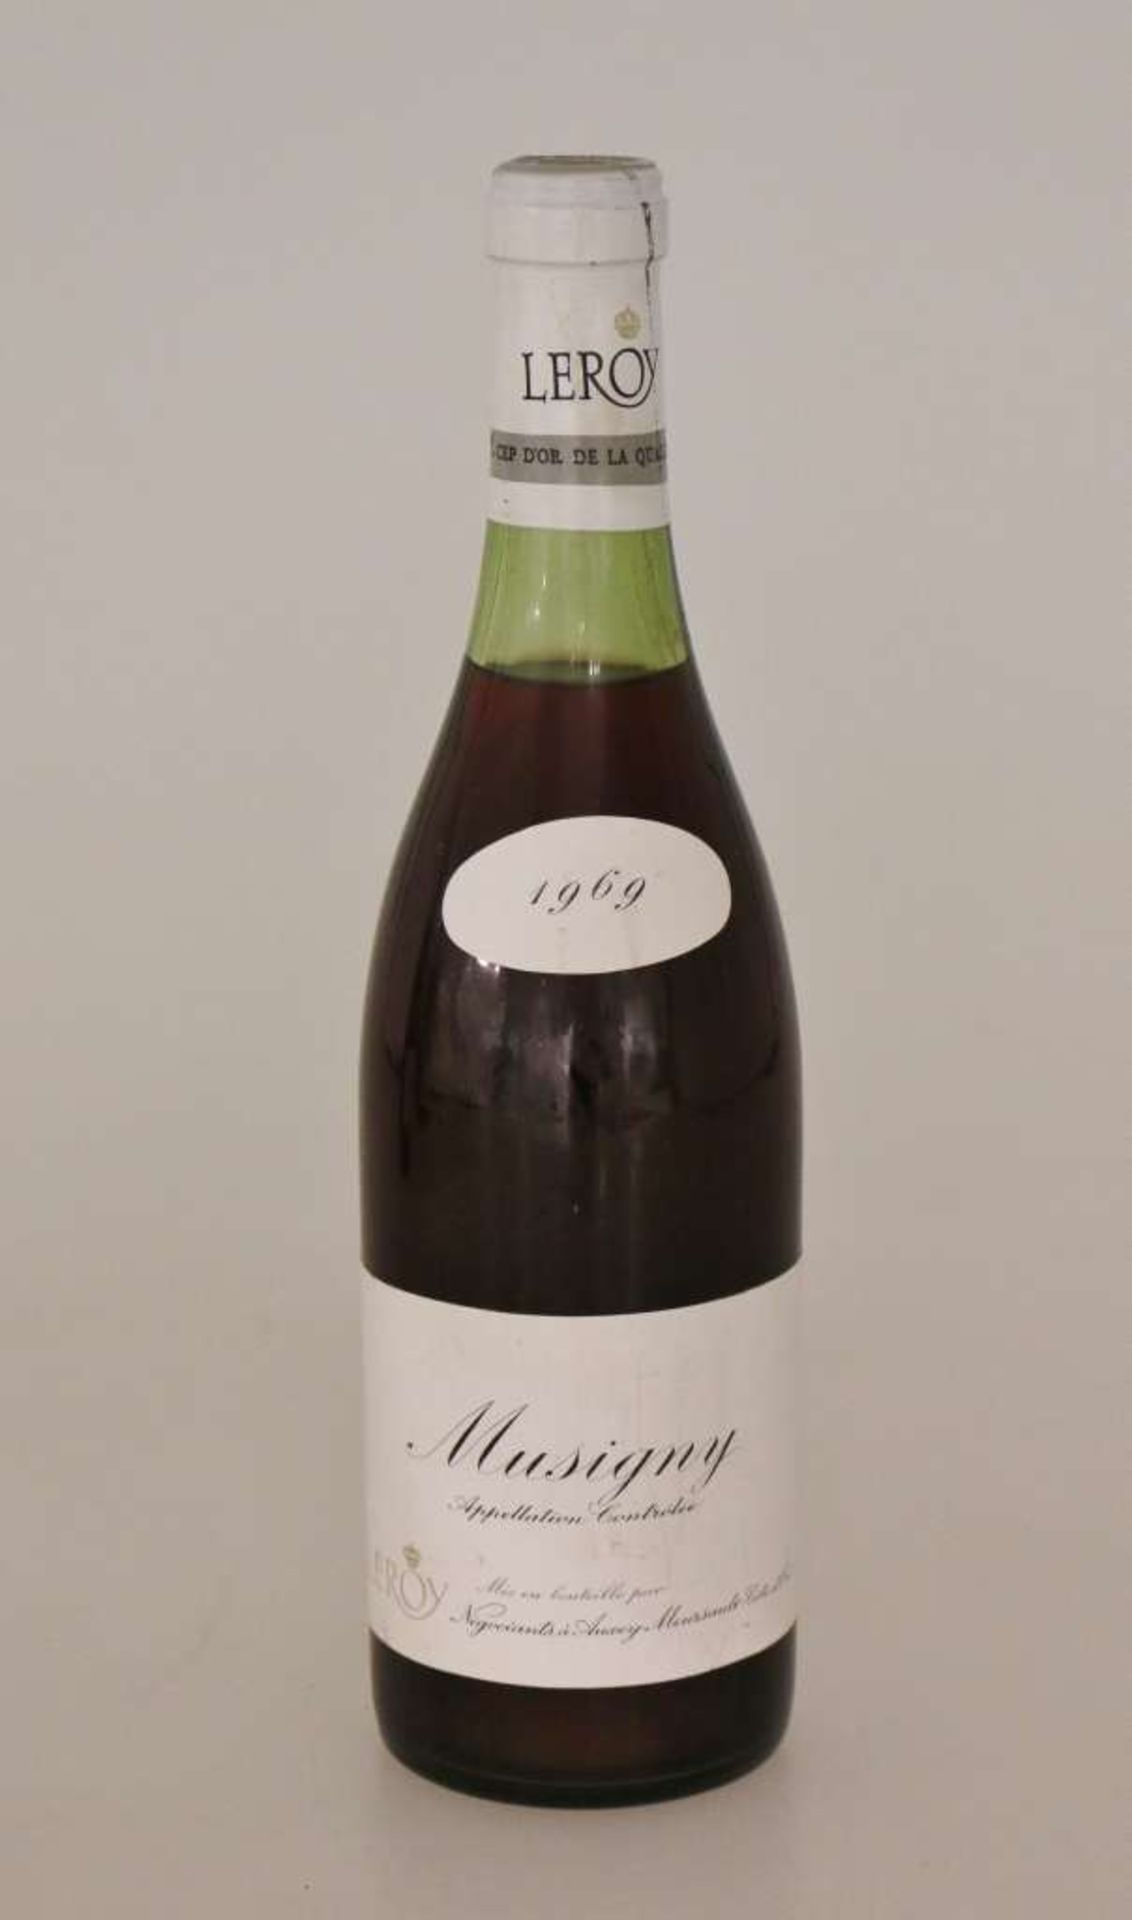 Rotwein, Flasche Musigny, 1969, Domaine Leroy, Grand Cru, Cote de Nuits, Bourgogne, 0,75 L, an